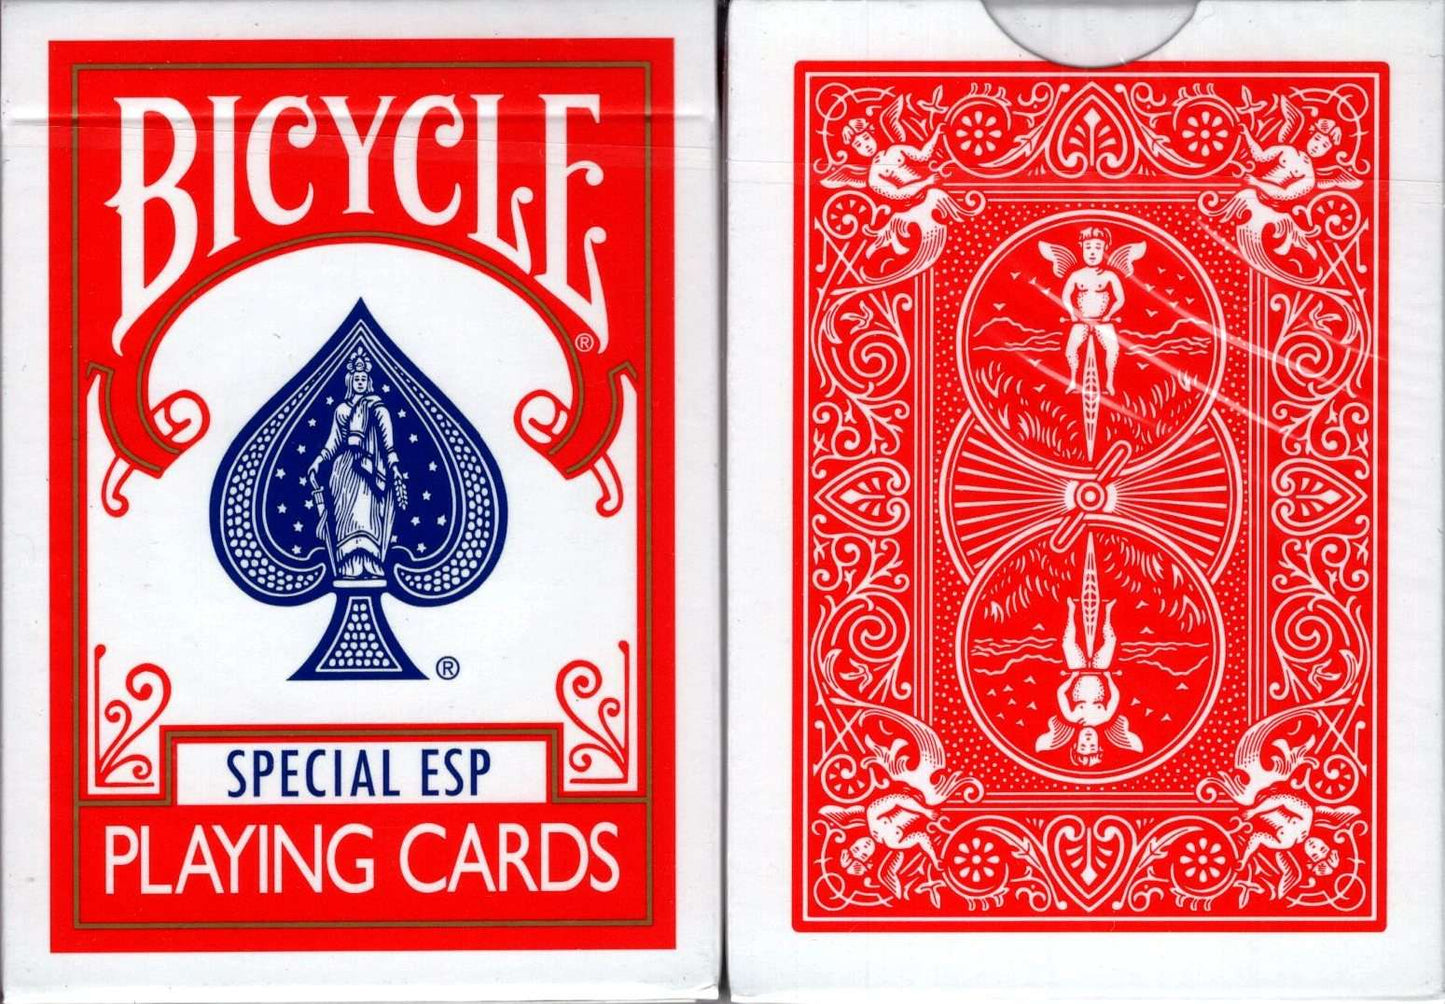 Special ESP Gaff Bicycle Playing Cards